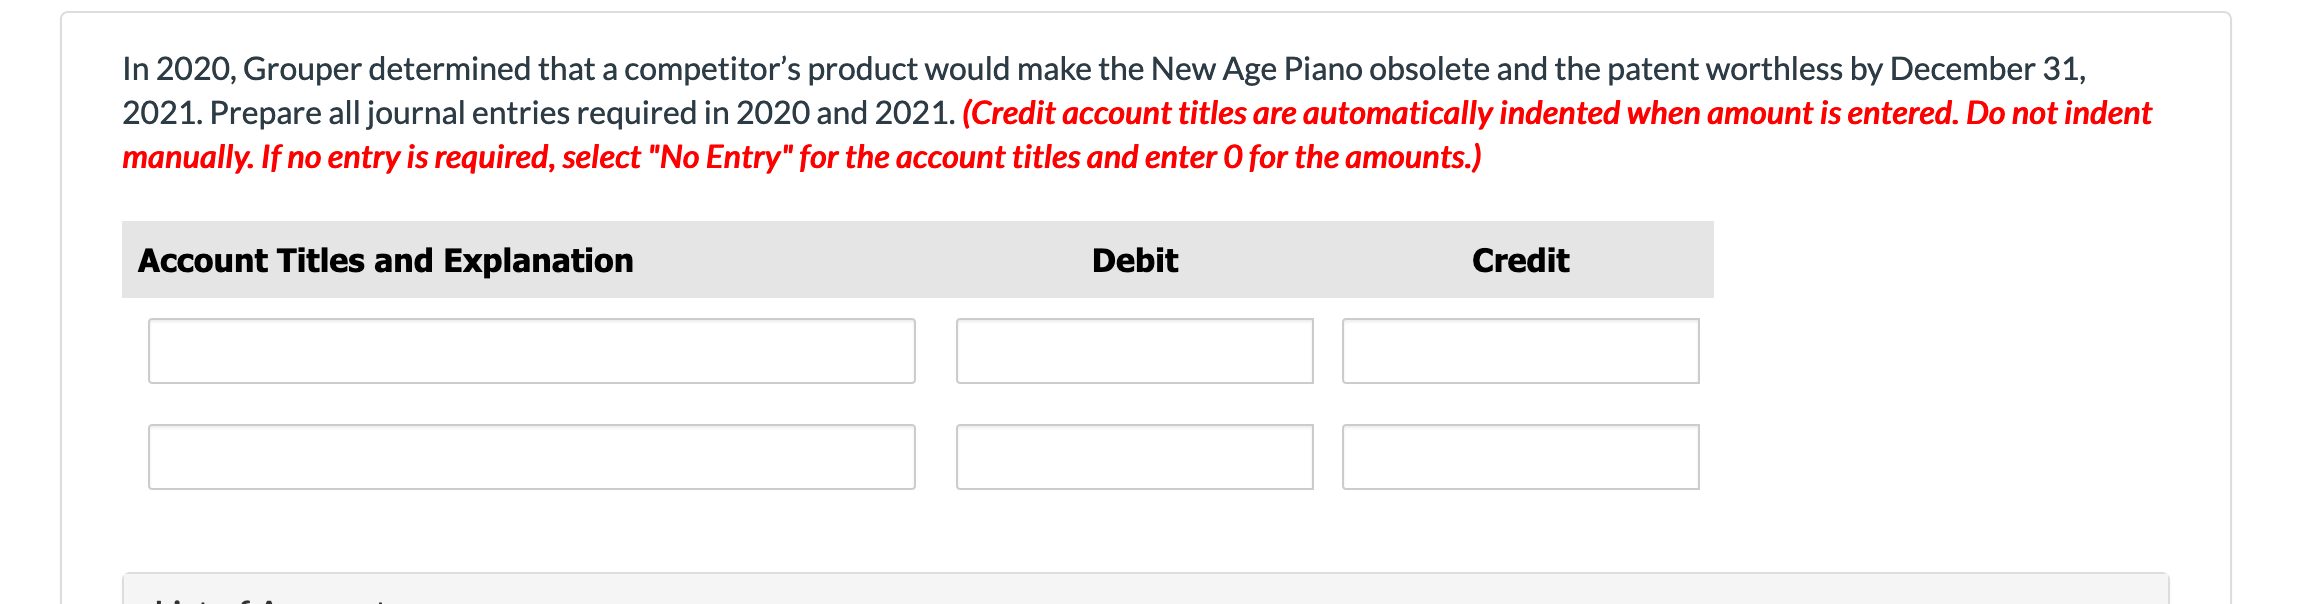 In 2020, grouper determined that a competitors product would make the new age piano obsolete and the patent worthless by dec